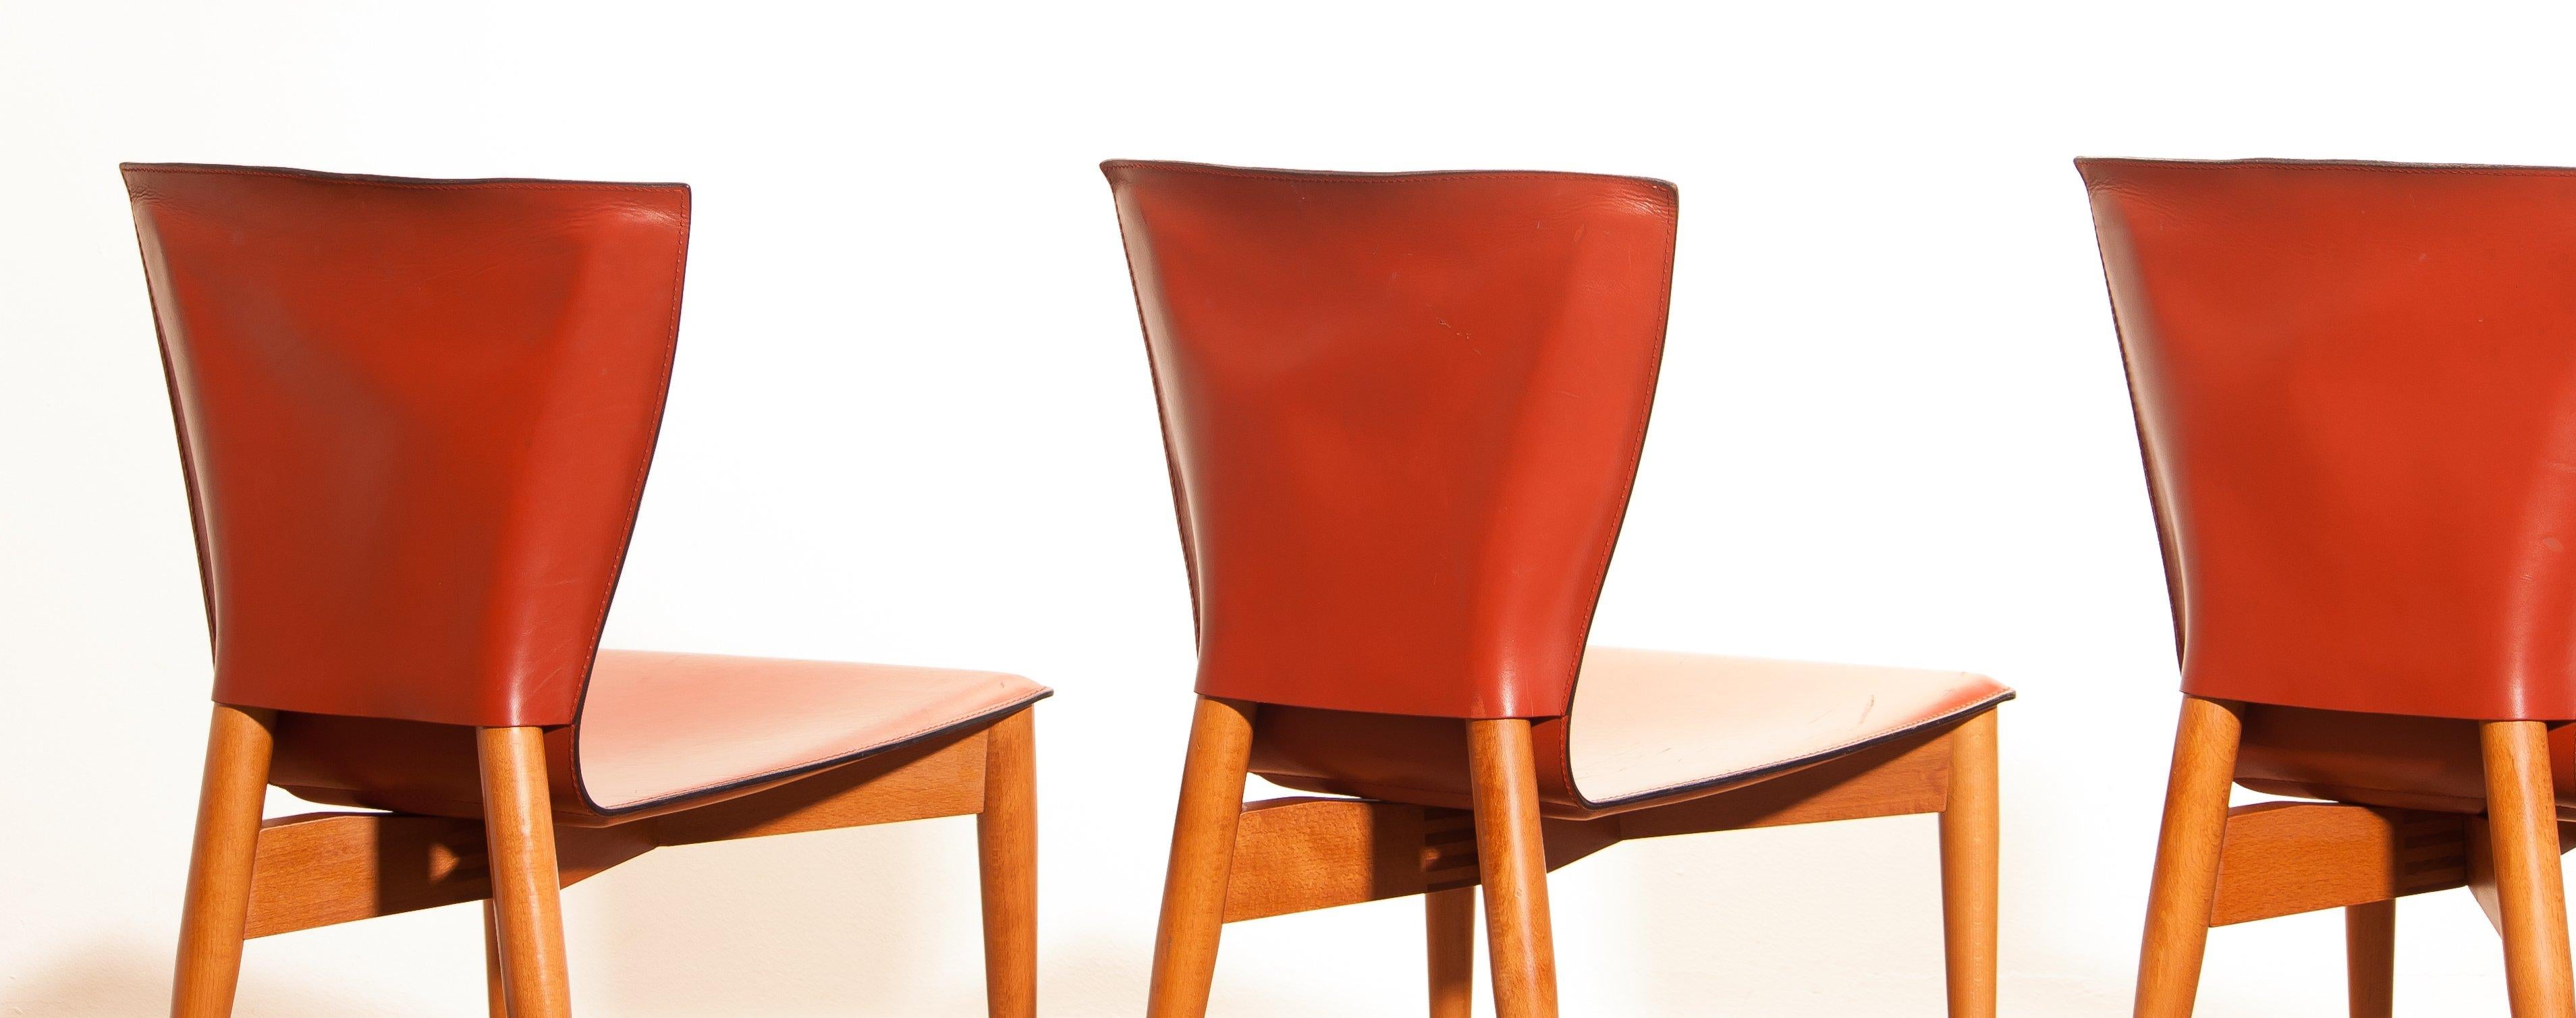 Italian 1970s Set of Four 'Vela' Dining Chairs by Carlo Bartoli for Matteo Grassi